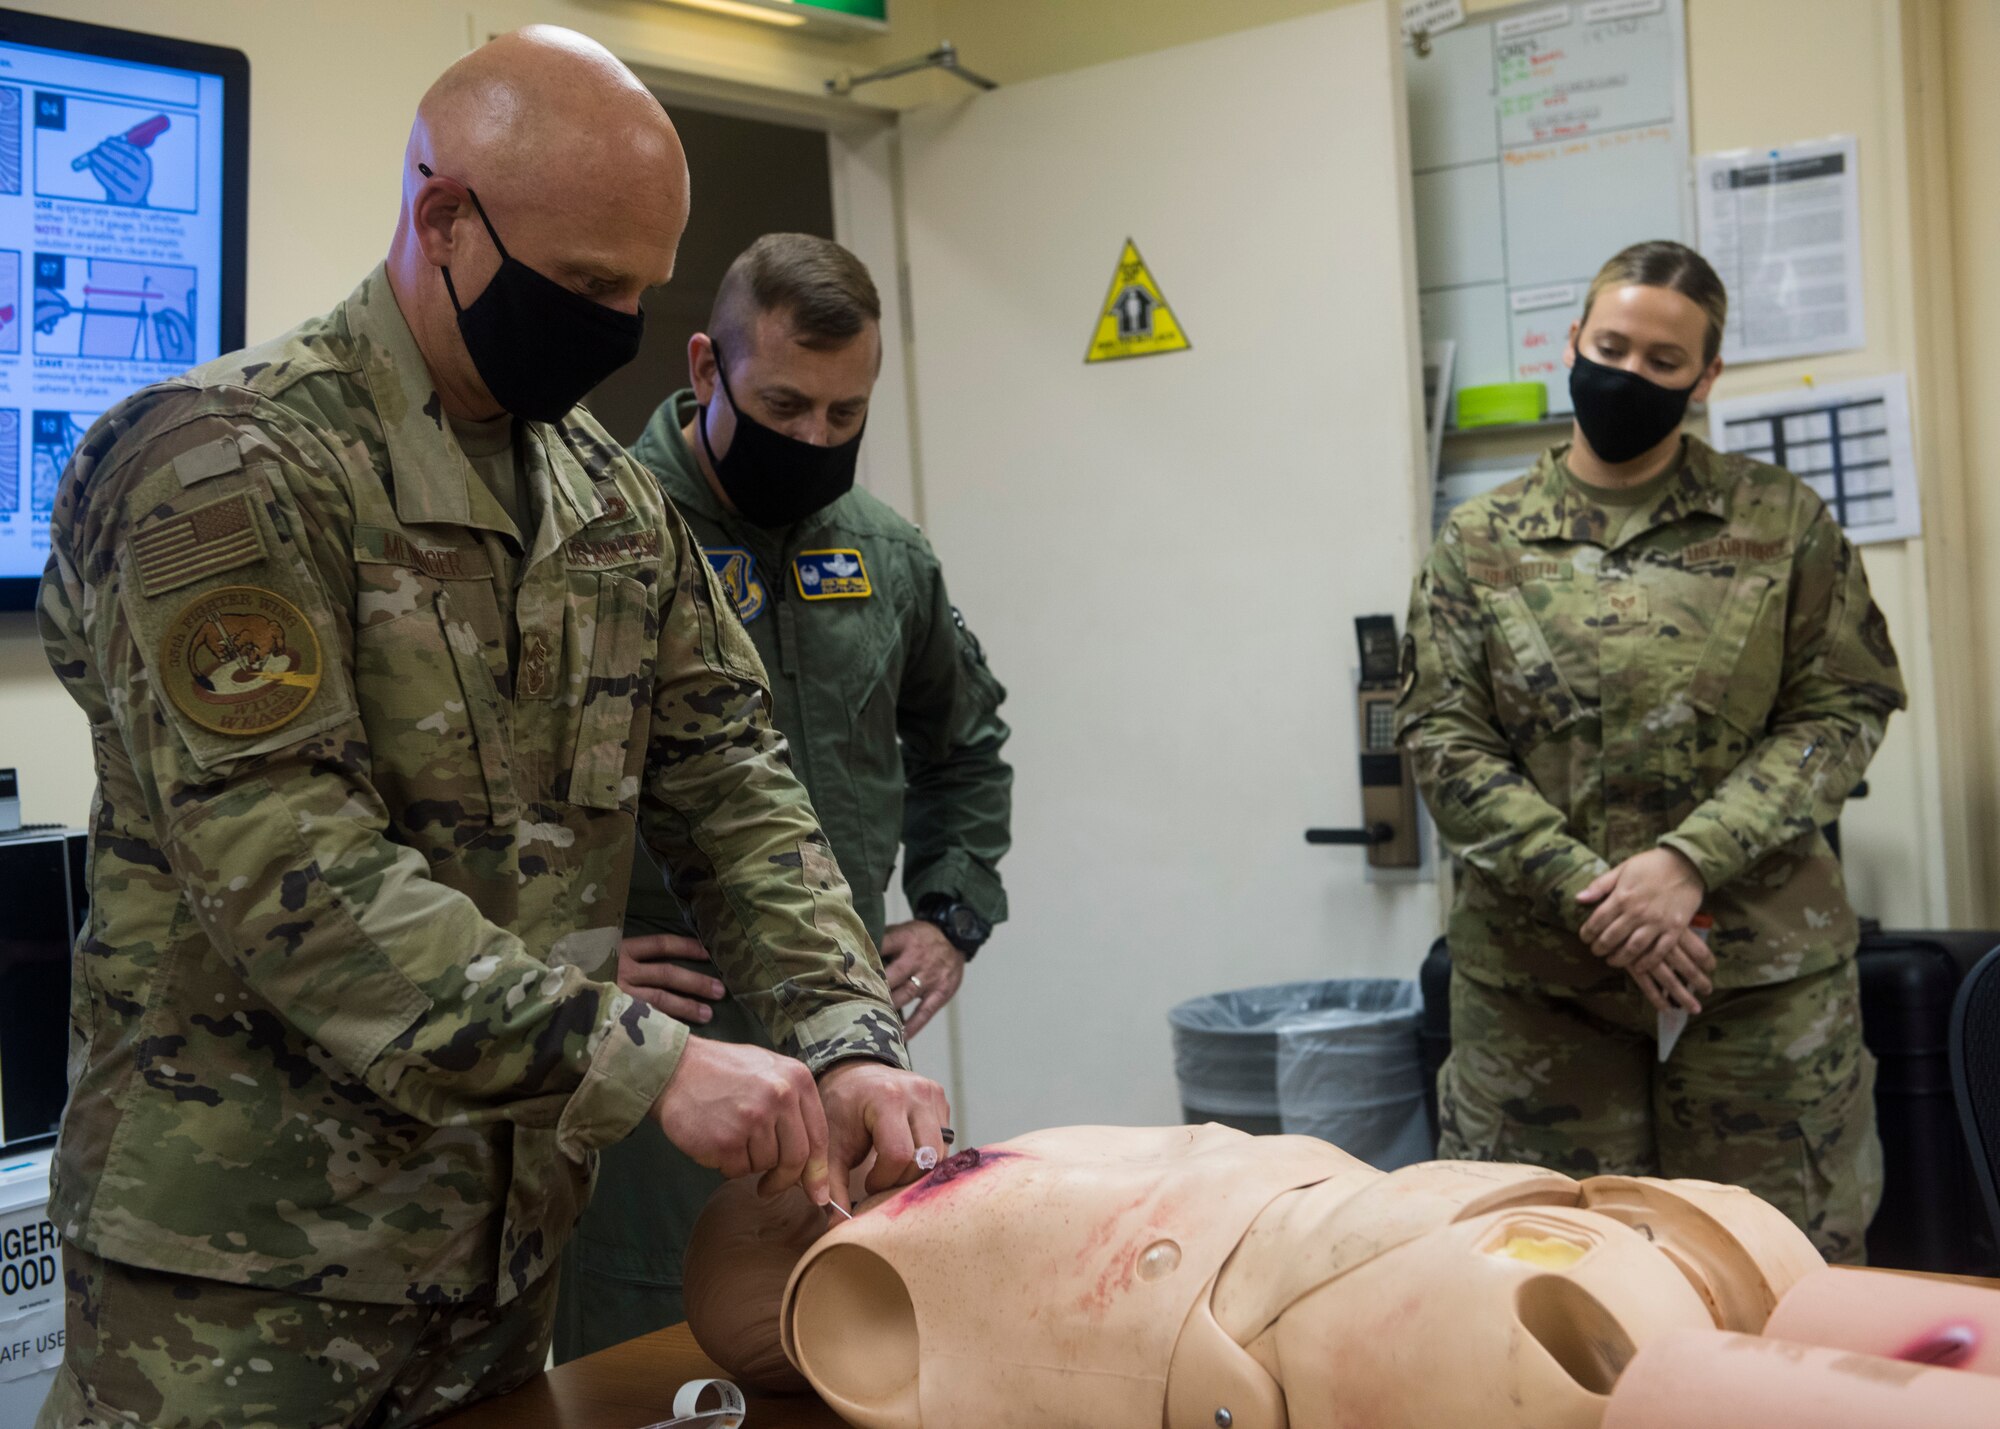 Servicemembers in uniform use a needle on a simulated patient.